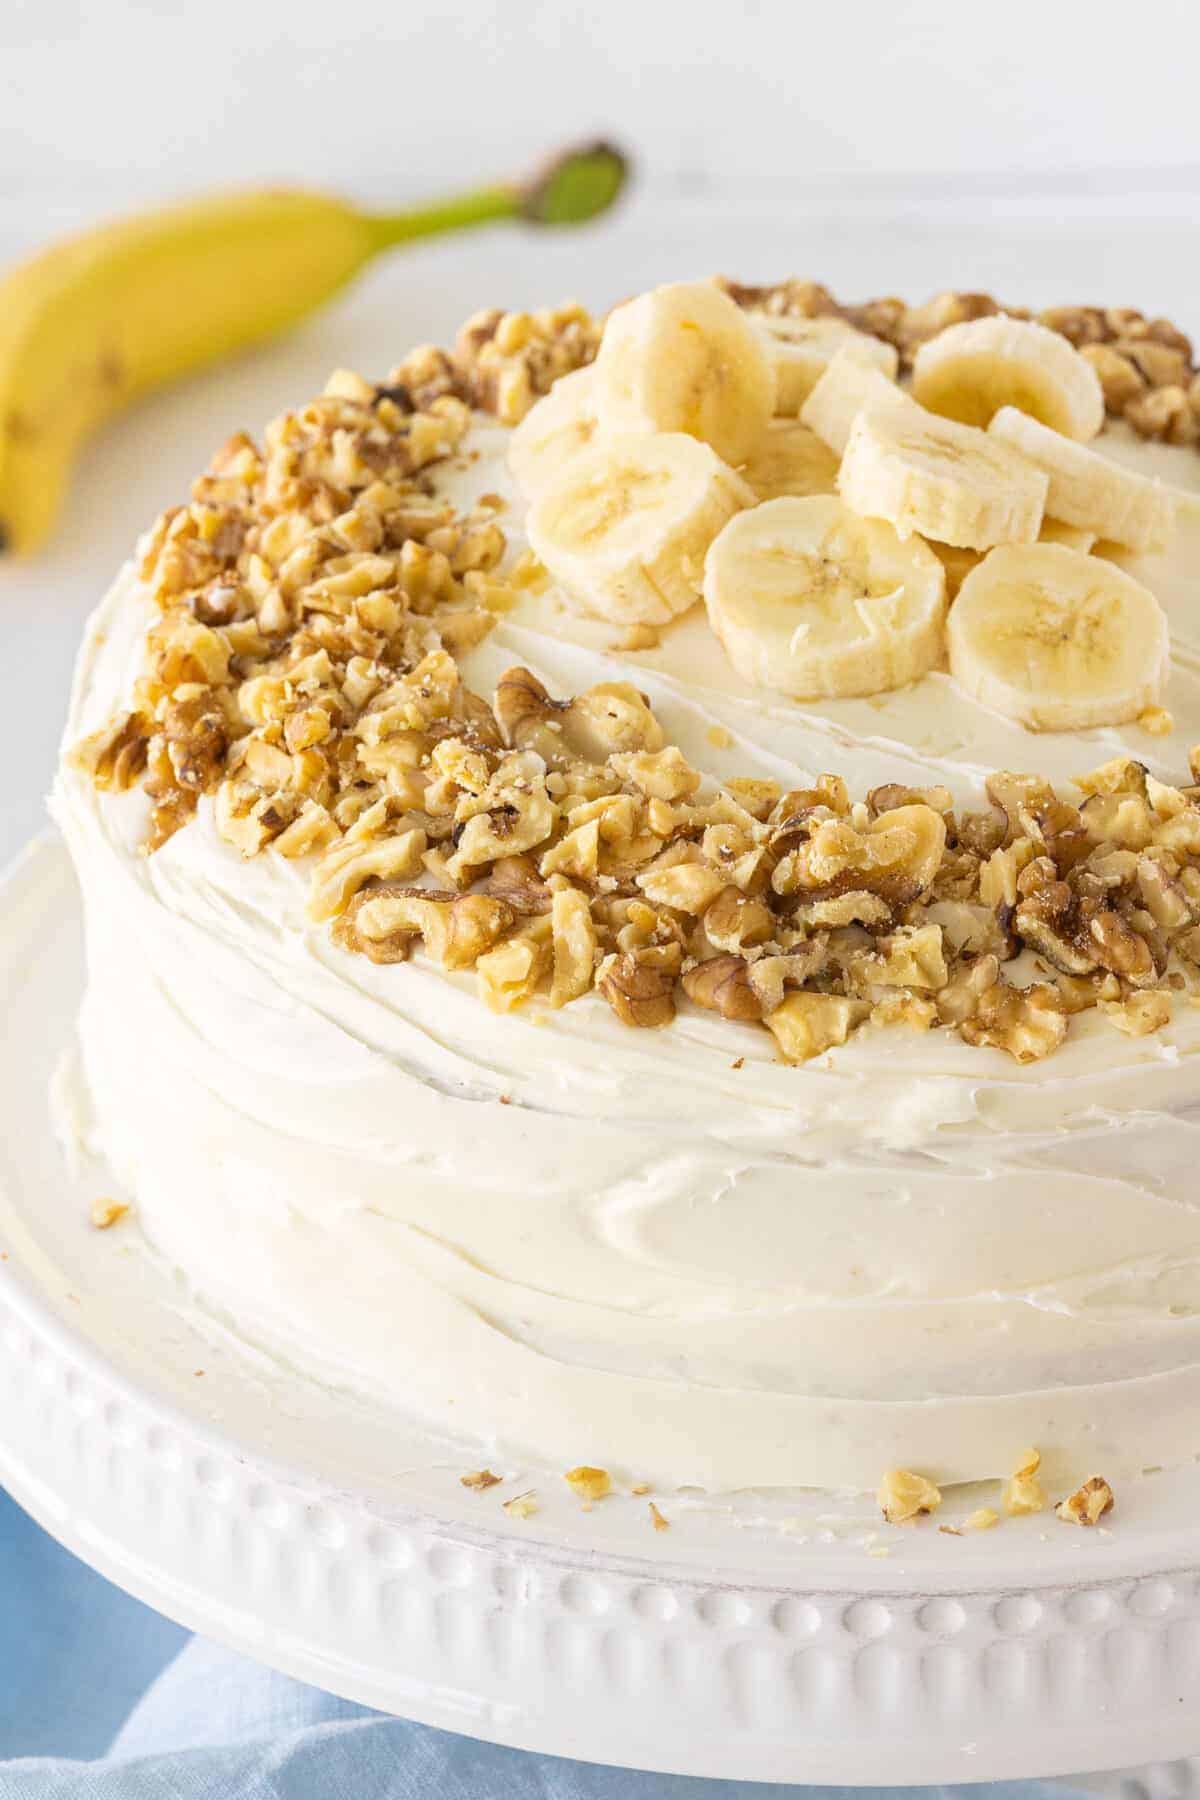 whole frosted banana cake with walnuts and fresh bananas on top